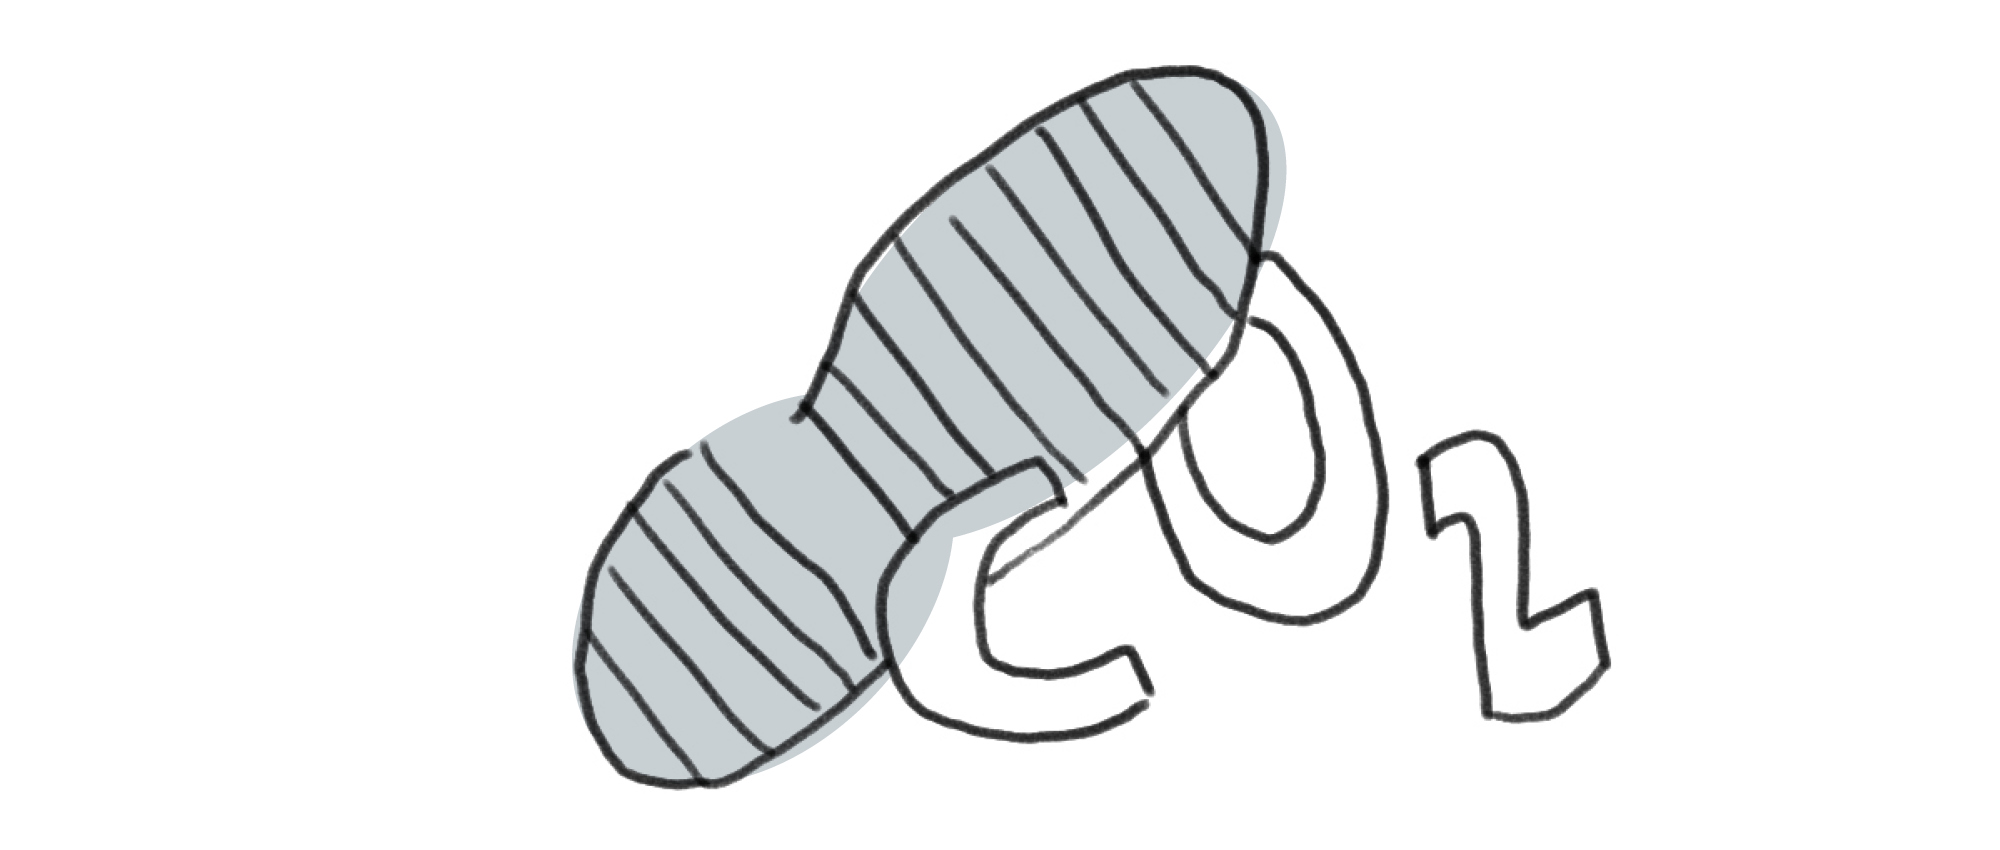 Illustration of a shoe print and the lettering CO2.